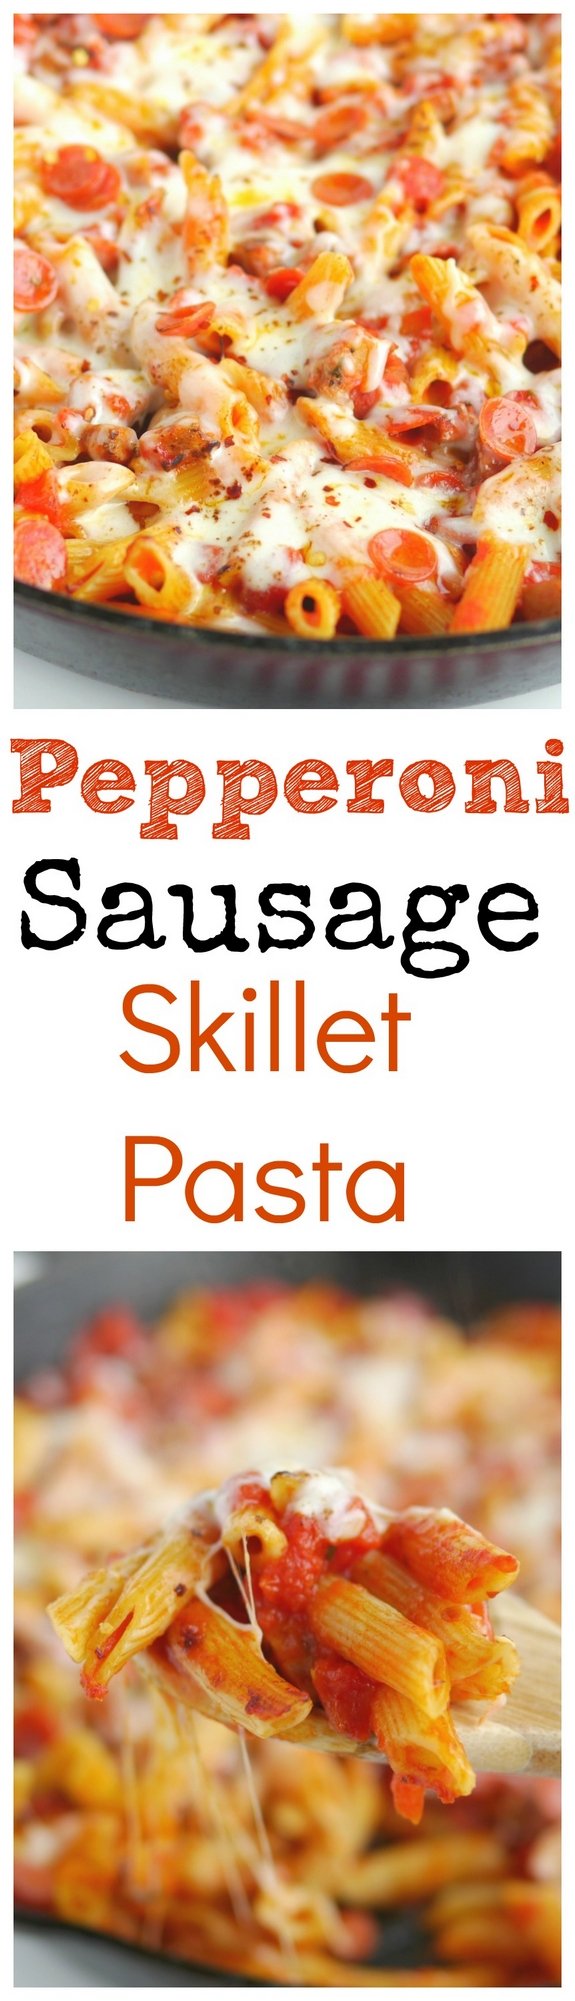 Pepperoni Sausage Skillet Pasta is comfort food at its best  Enjoy this easy weeknight meal with the family 